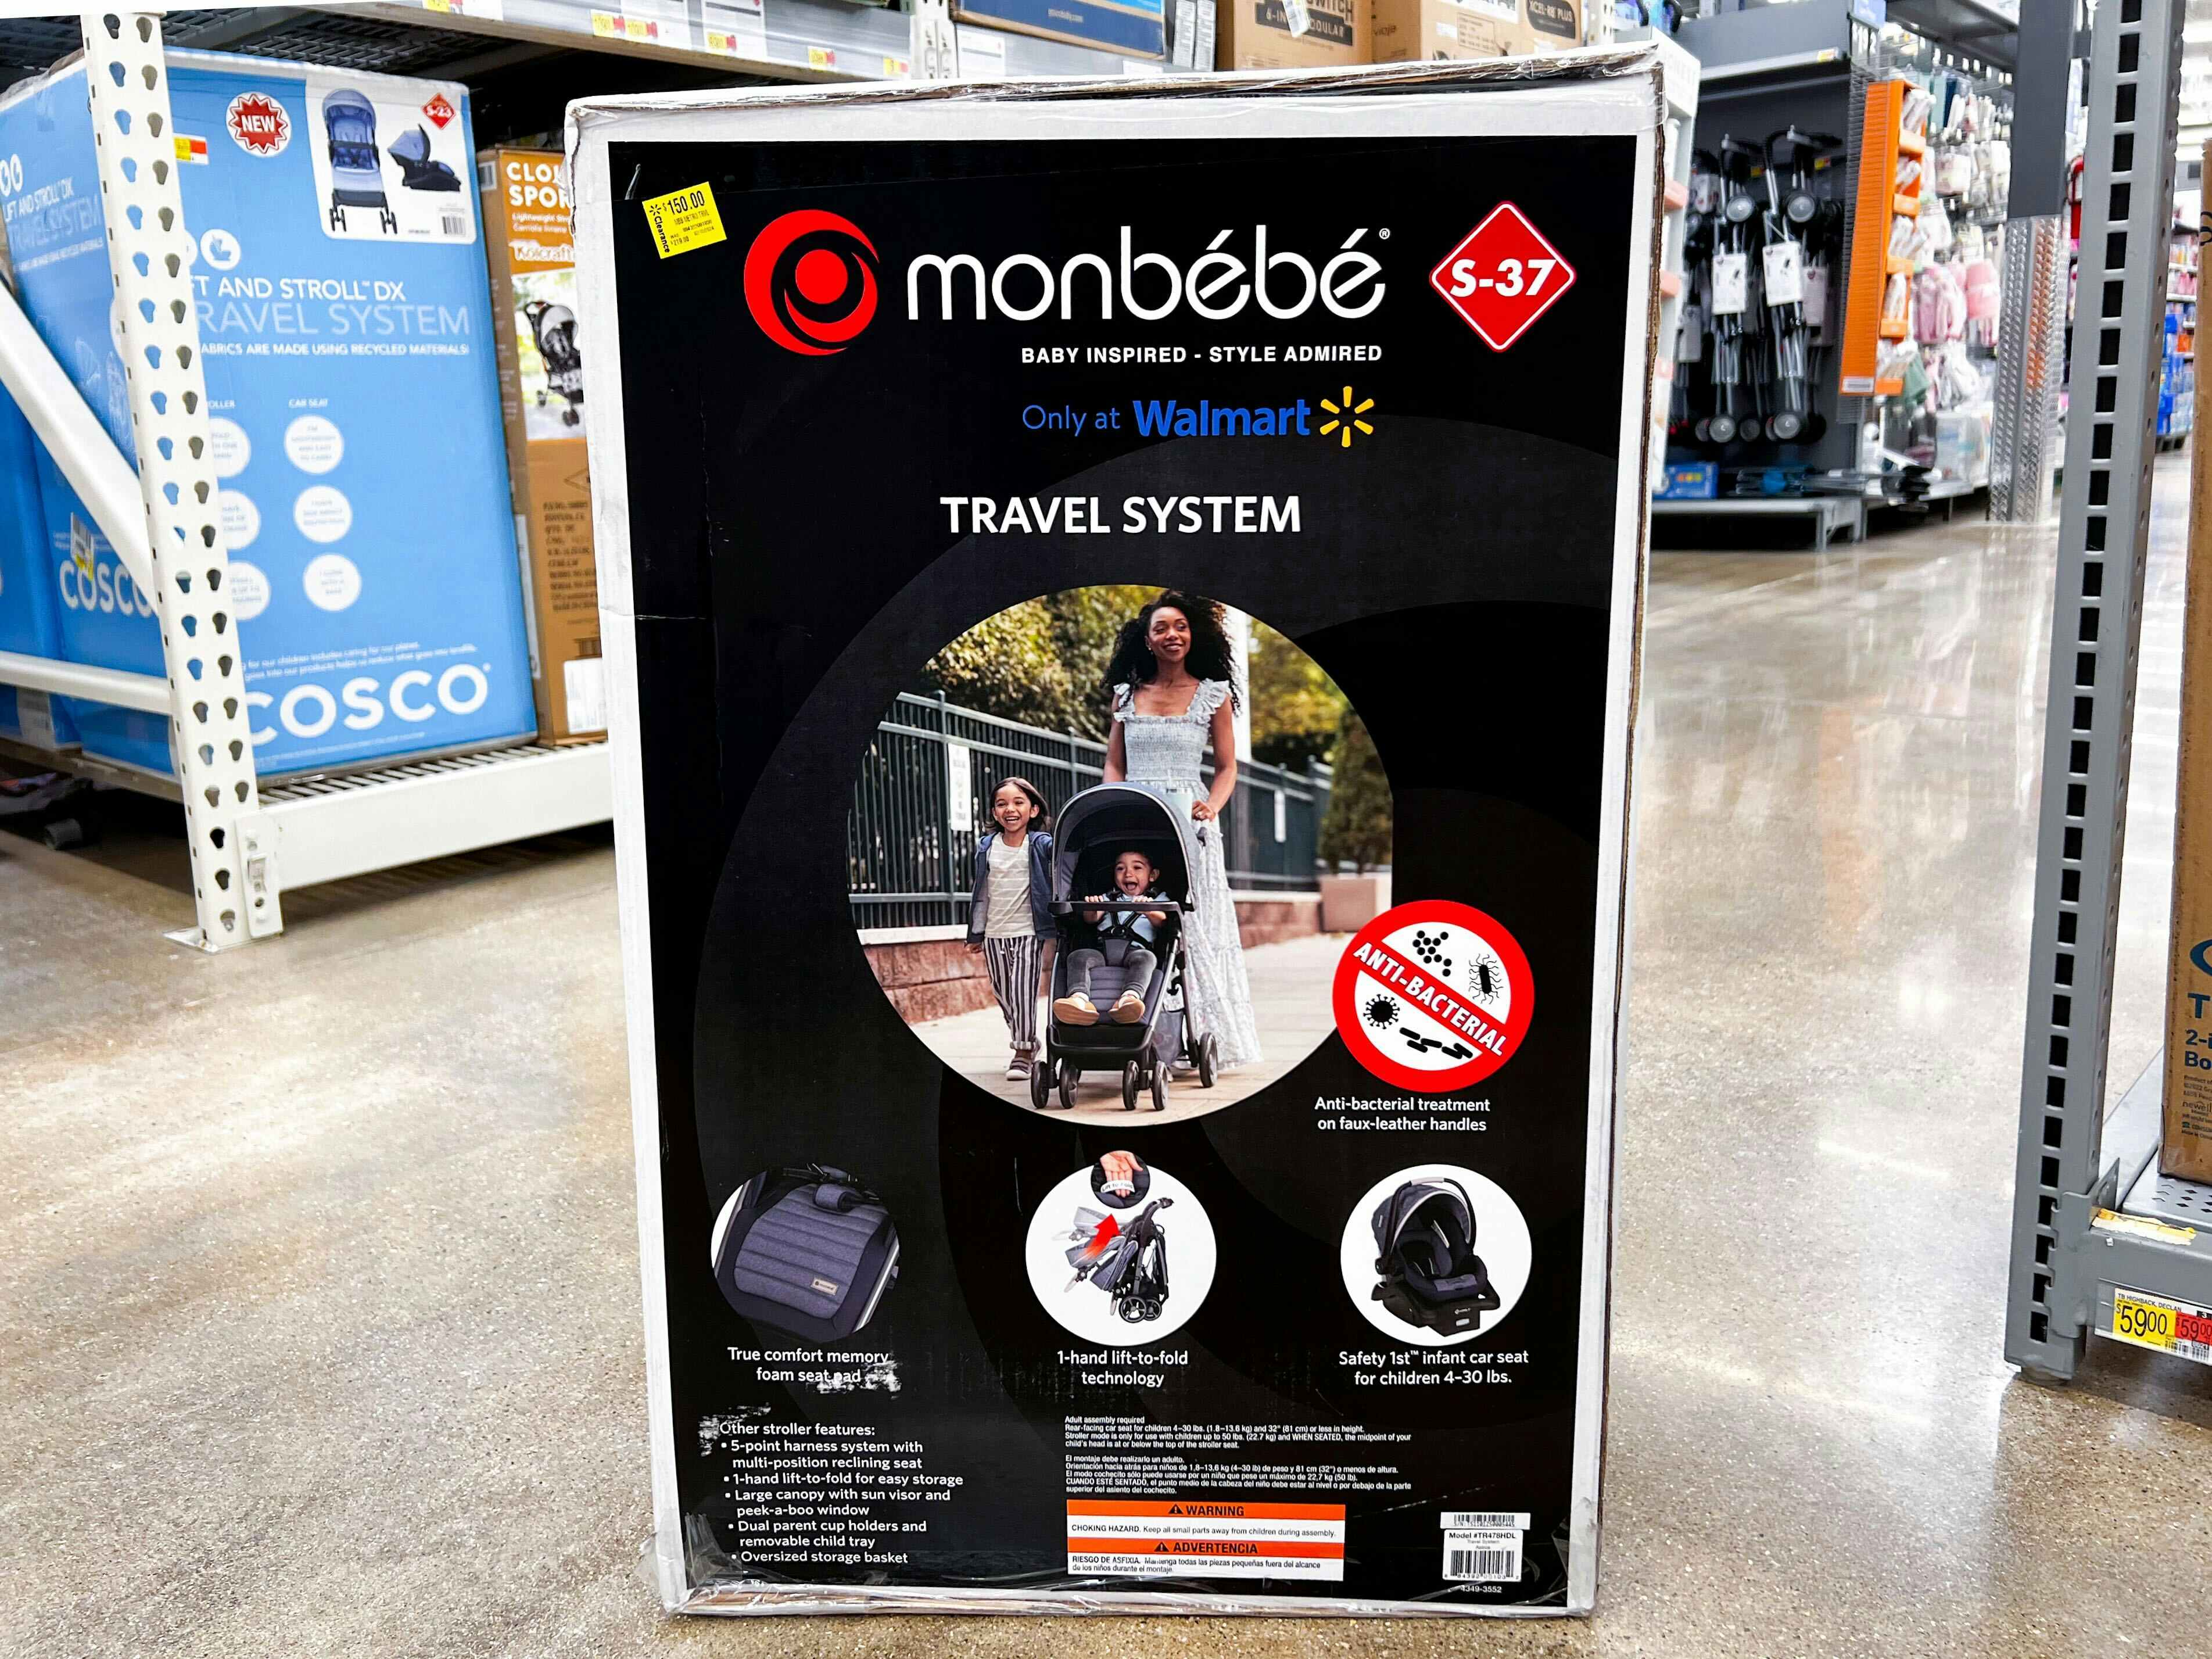 Travel Systems at Walmart, Starting at $144 (Includes Stroller and Car Seat)